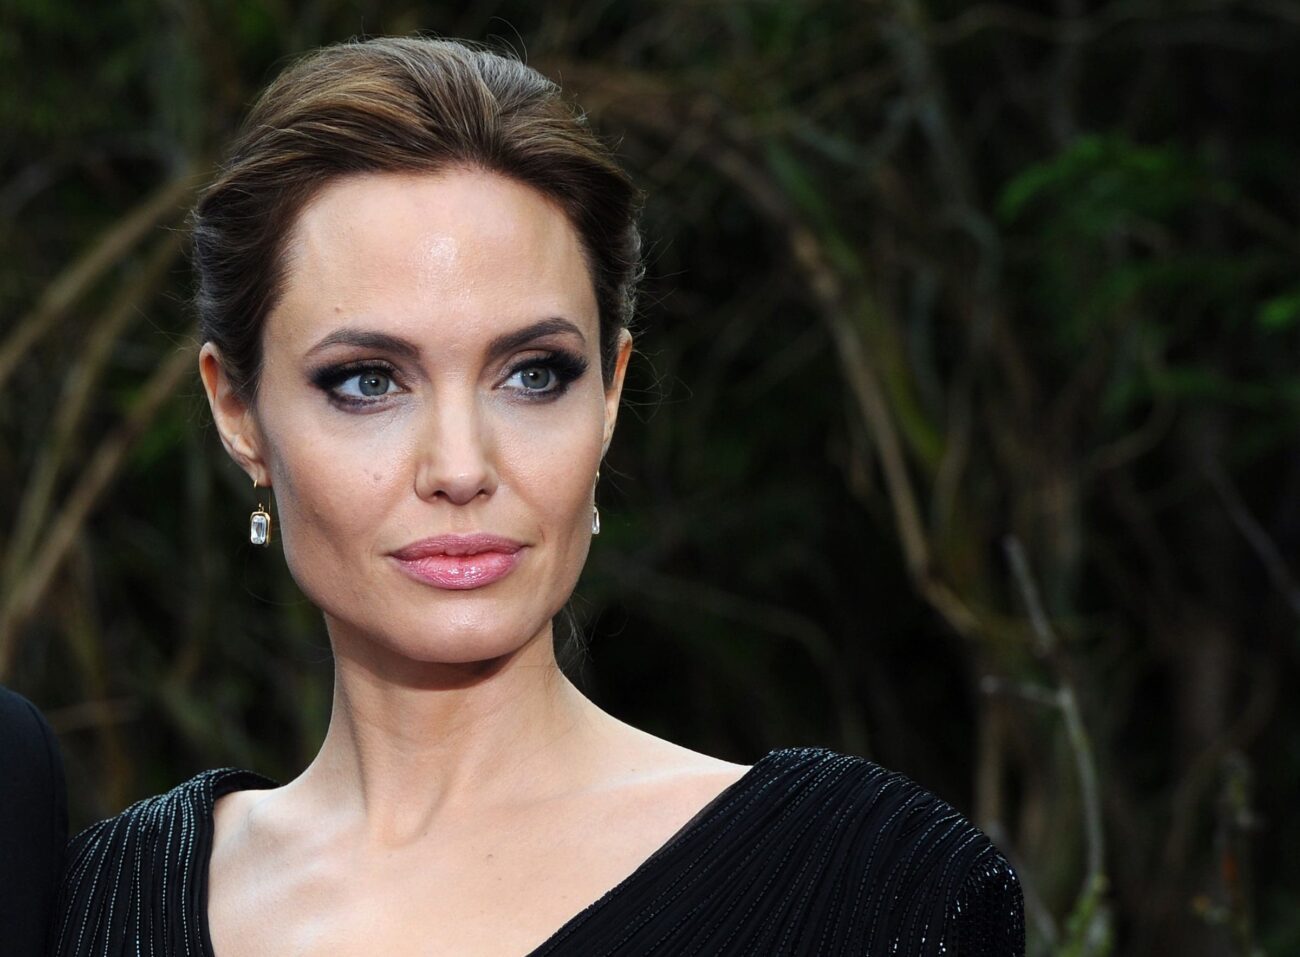 Angelina Jolie has finally joined Instagram! The actress & activist posted an emotional message on the crisis in Afghanistan. Read her first post here!